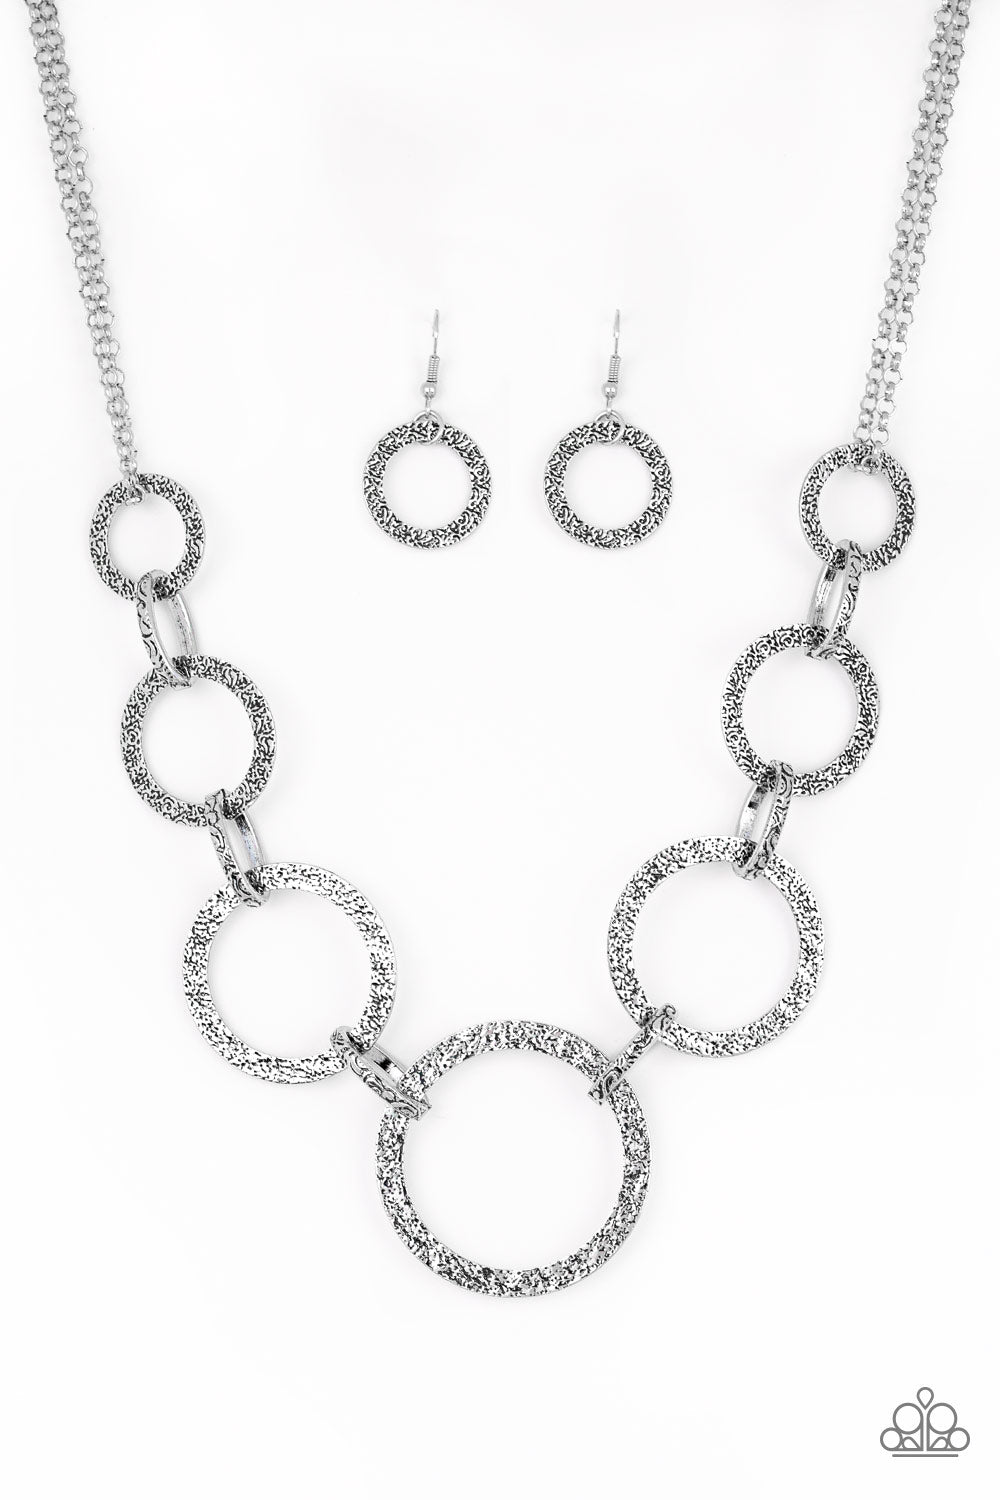 City Circus - Silver Necklace Earring Set Paparazzi 2551